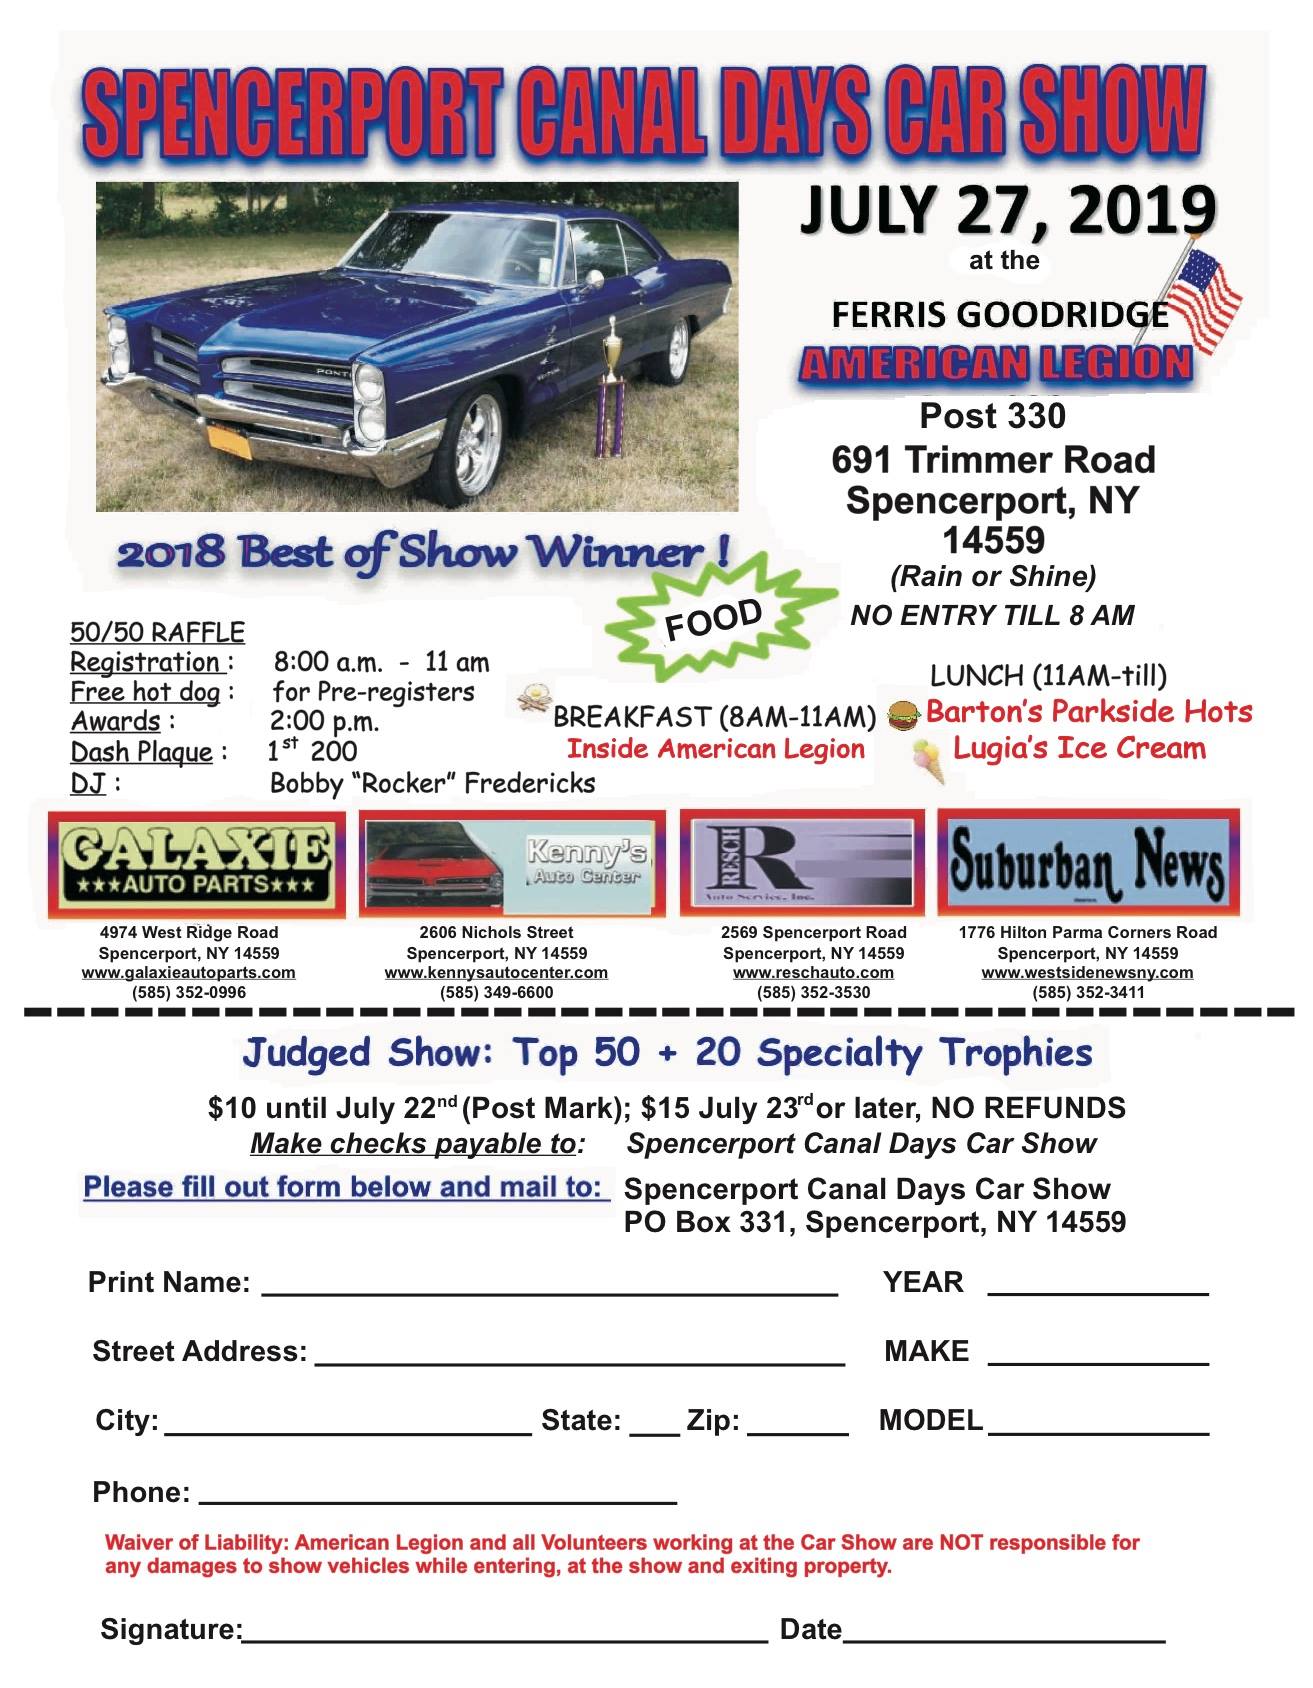 2019 Spencerport Canal Days Car Show